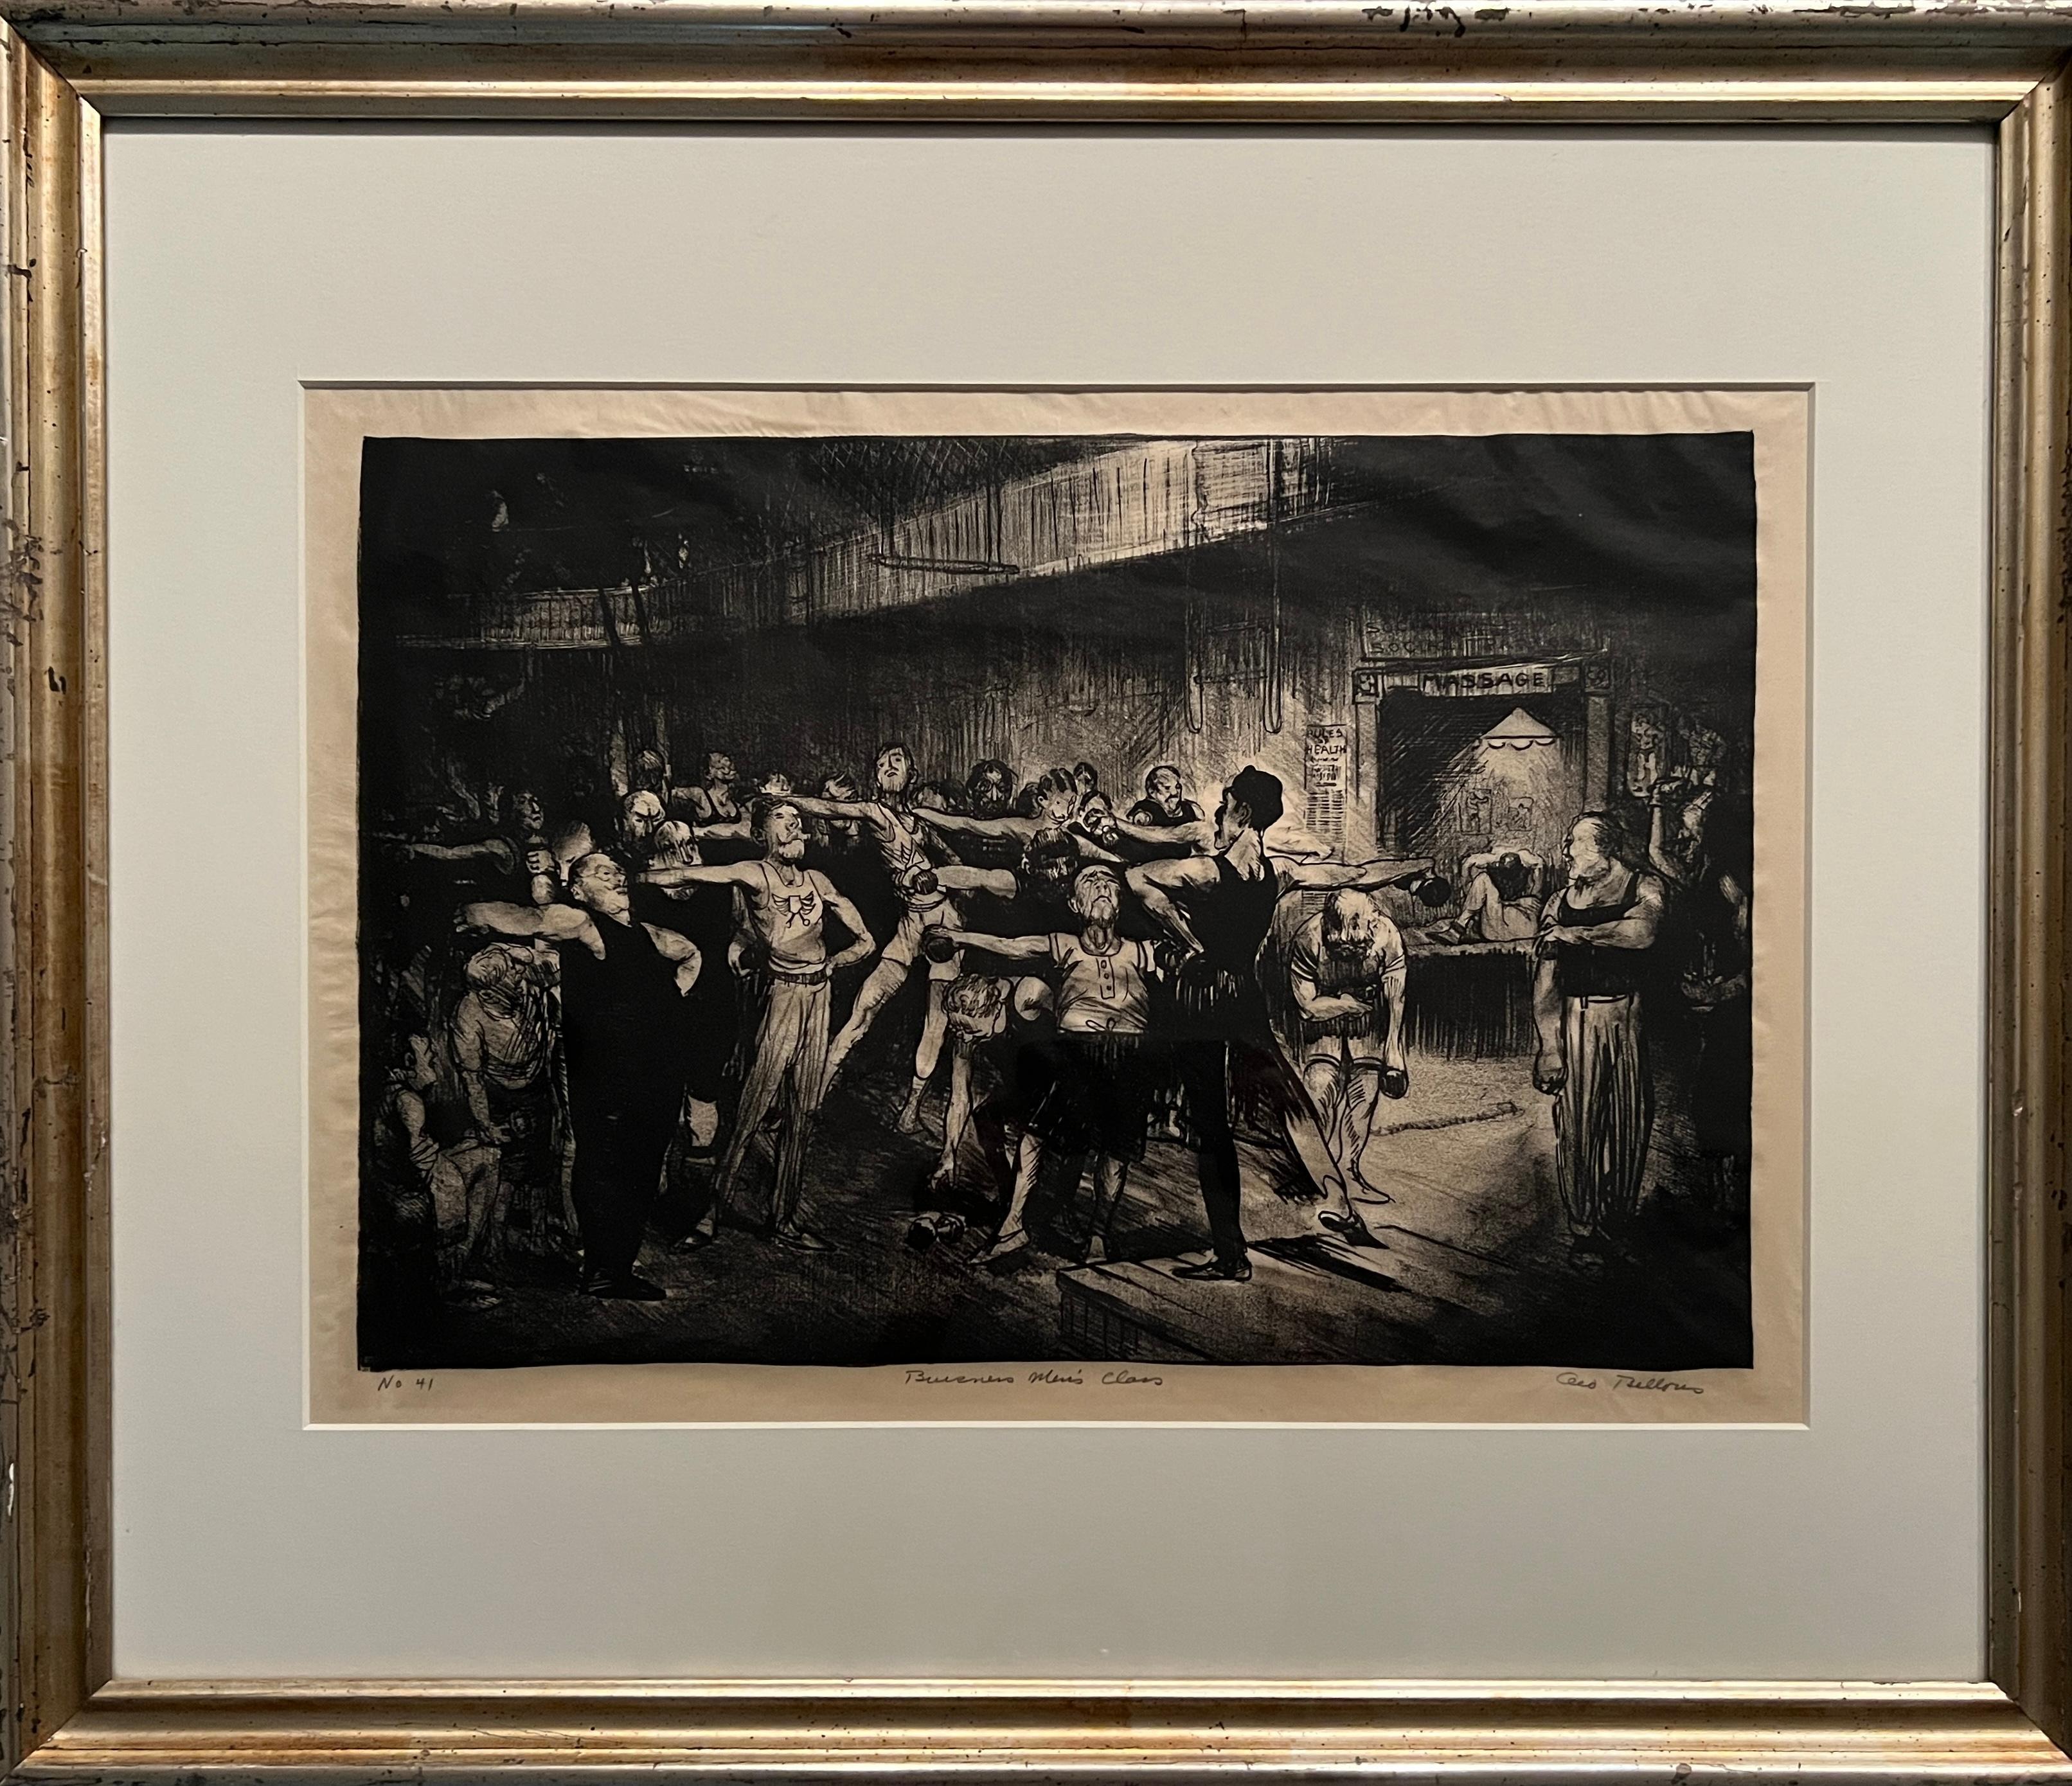 George Bellows
Business-Men's Class, Y.M.C.A, 1916
Signed, numbered 